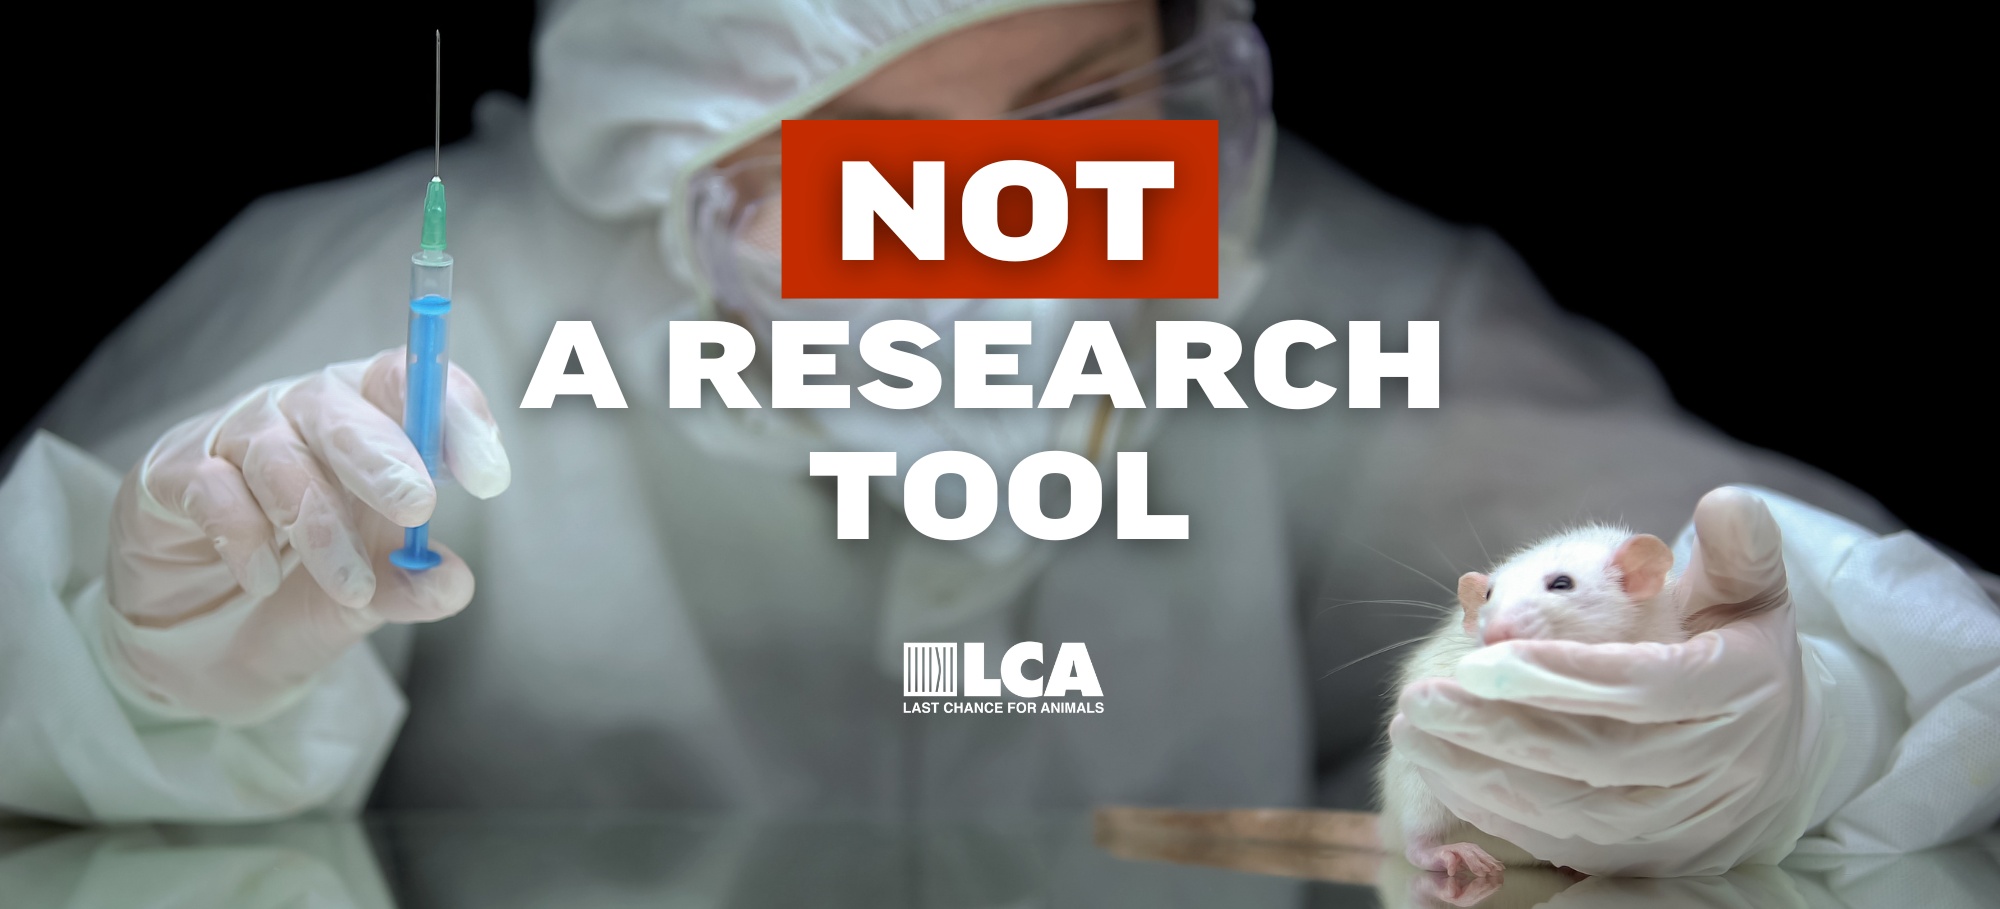 not a research tool stop animal research